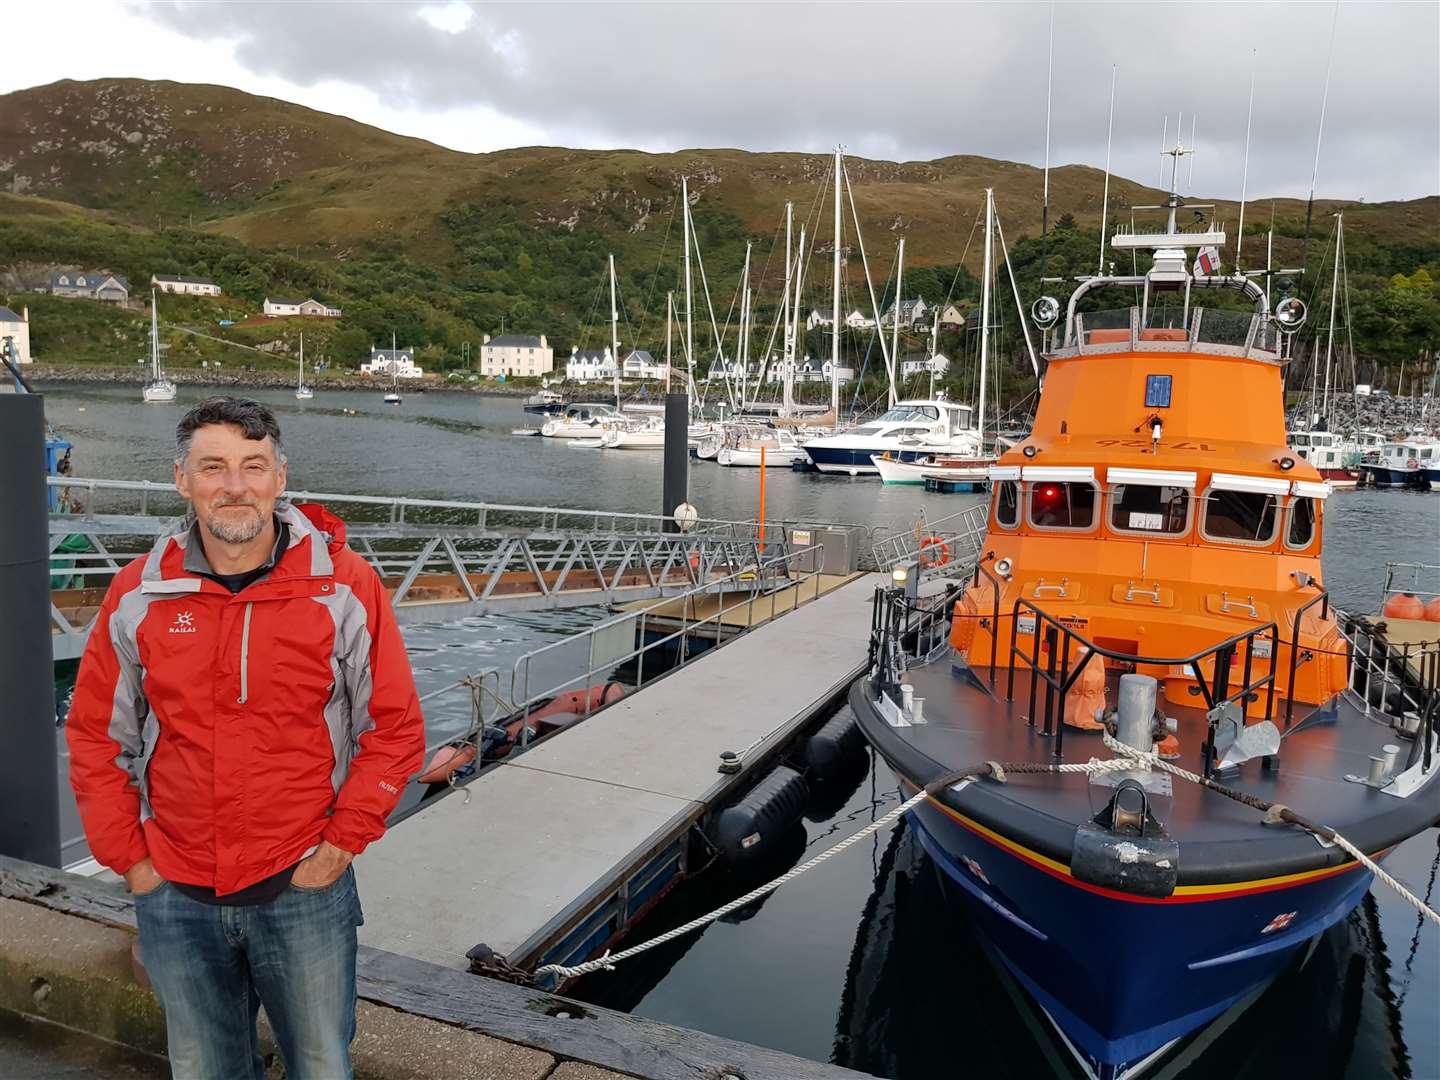 The author inspects the 57 foot Severn Class lifeboat based on the west coast of Scotland in Mallaig during 2018. Picture: Kevin Green